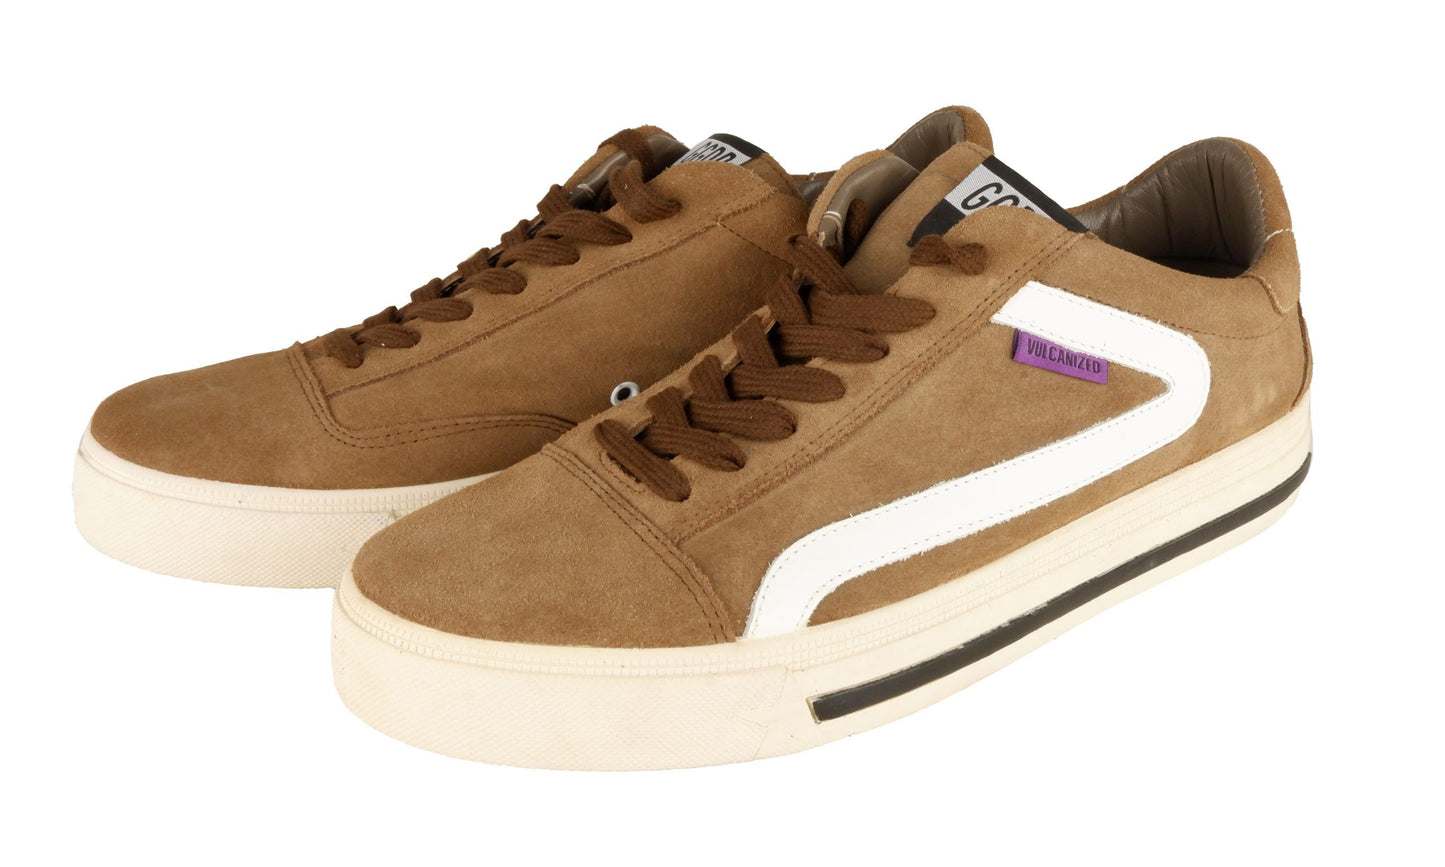 Exclusive Brown & White Vulcanized Sneakers